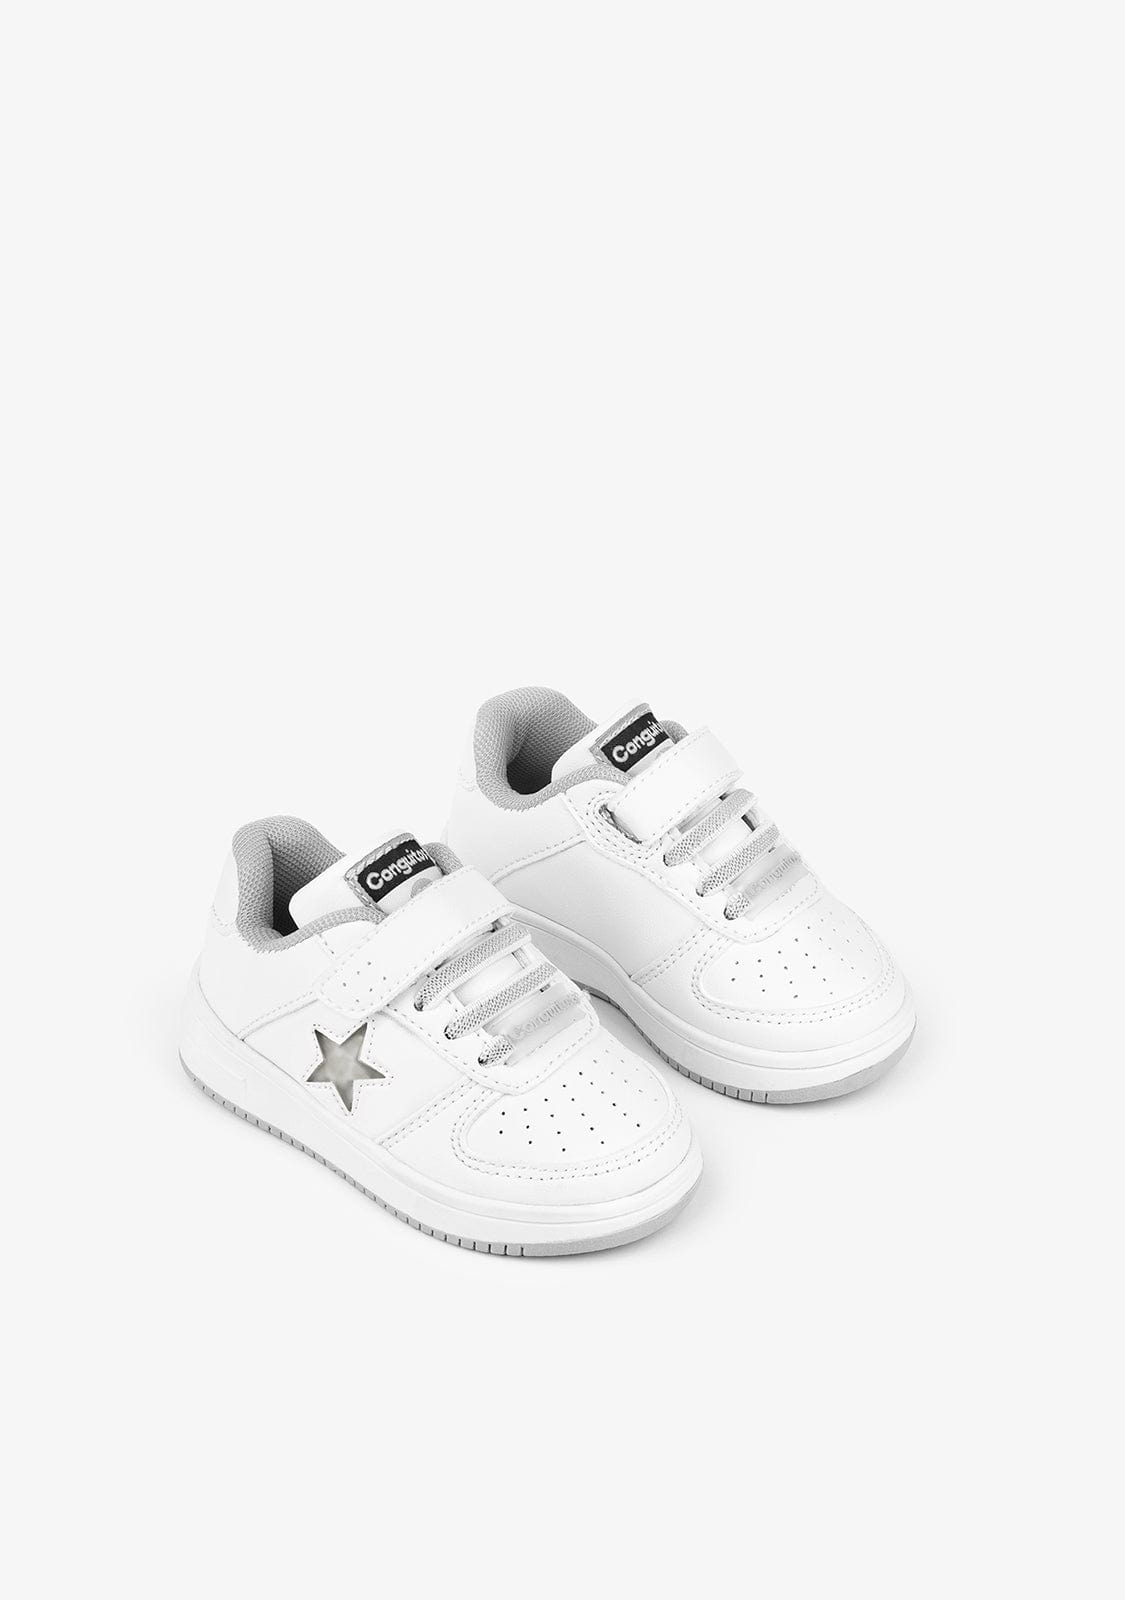 OSITO Shoes Baby's White Star With Lights Sneakers